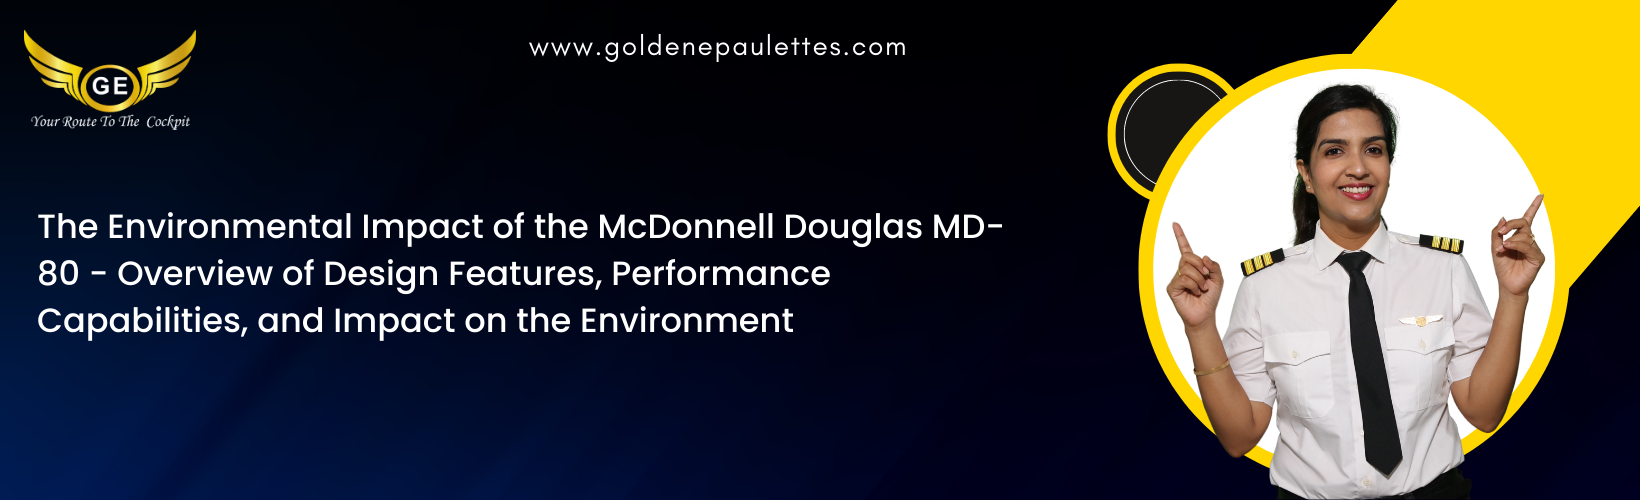 The McDonnell Douglas MD